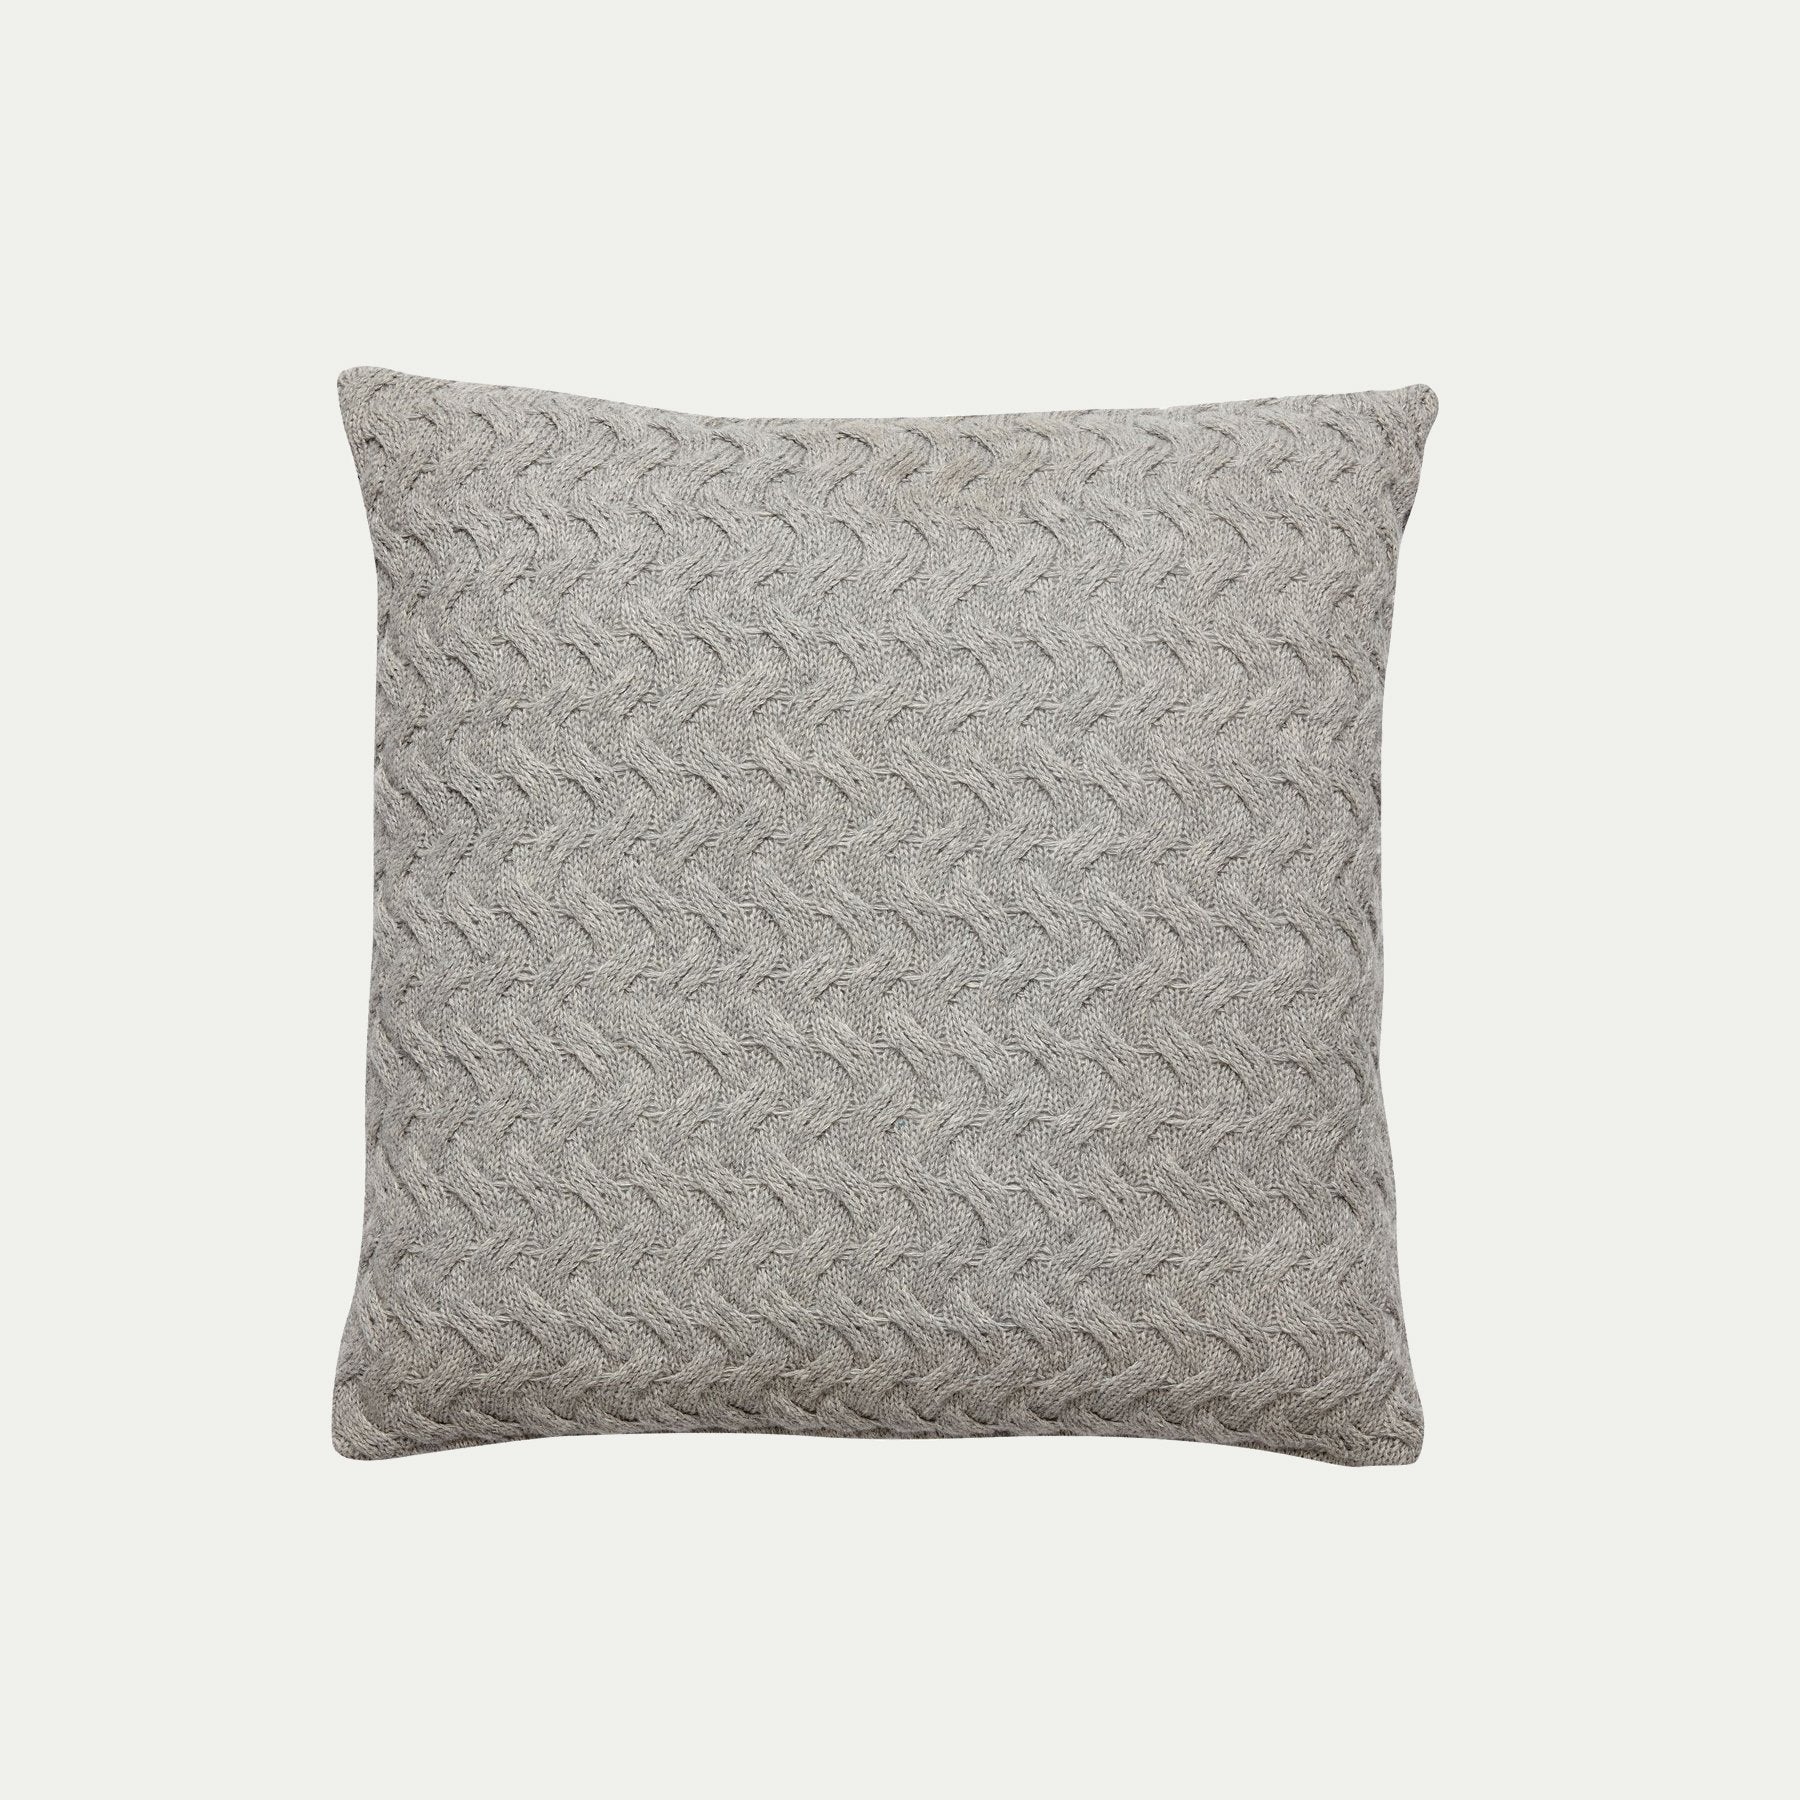 Hubsch Interior 50x50 wool cable knit cushion in pale grey on white background